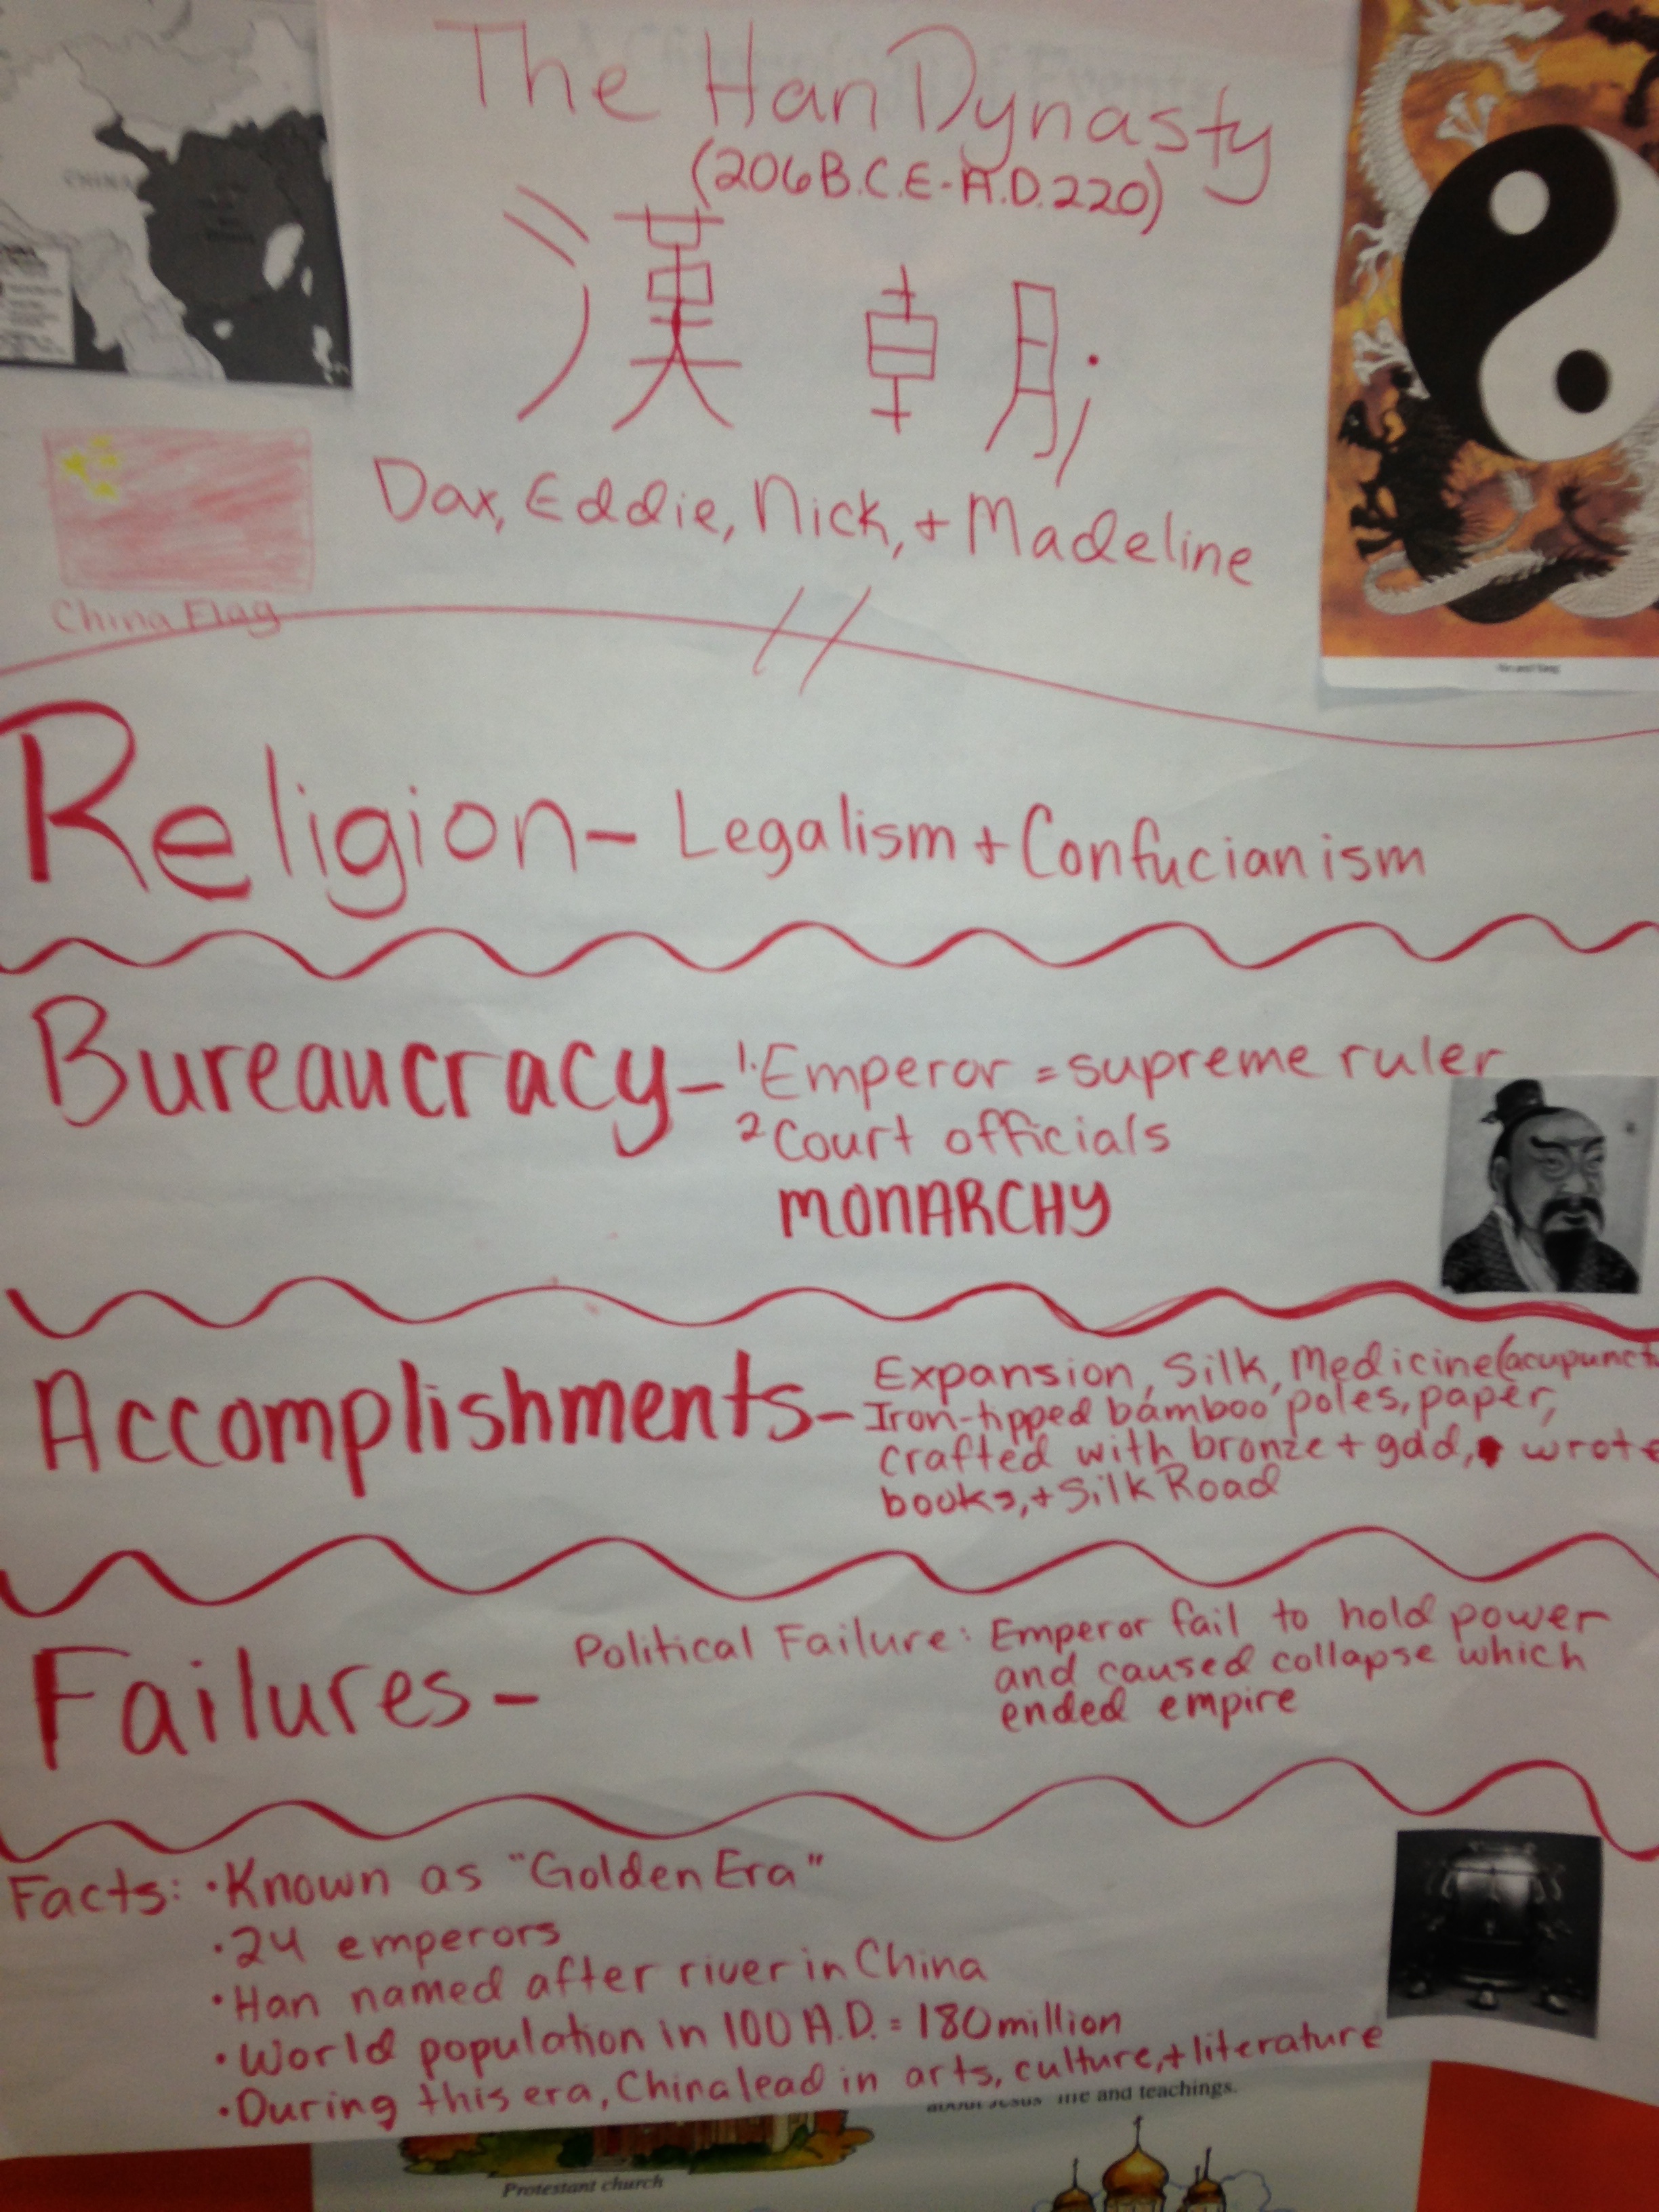 facts about legalism in ancient china